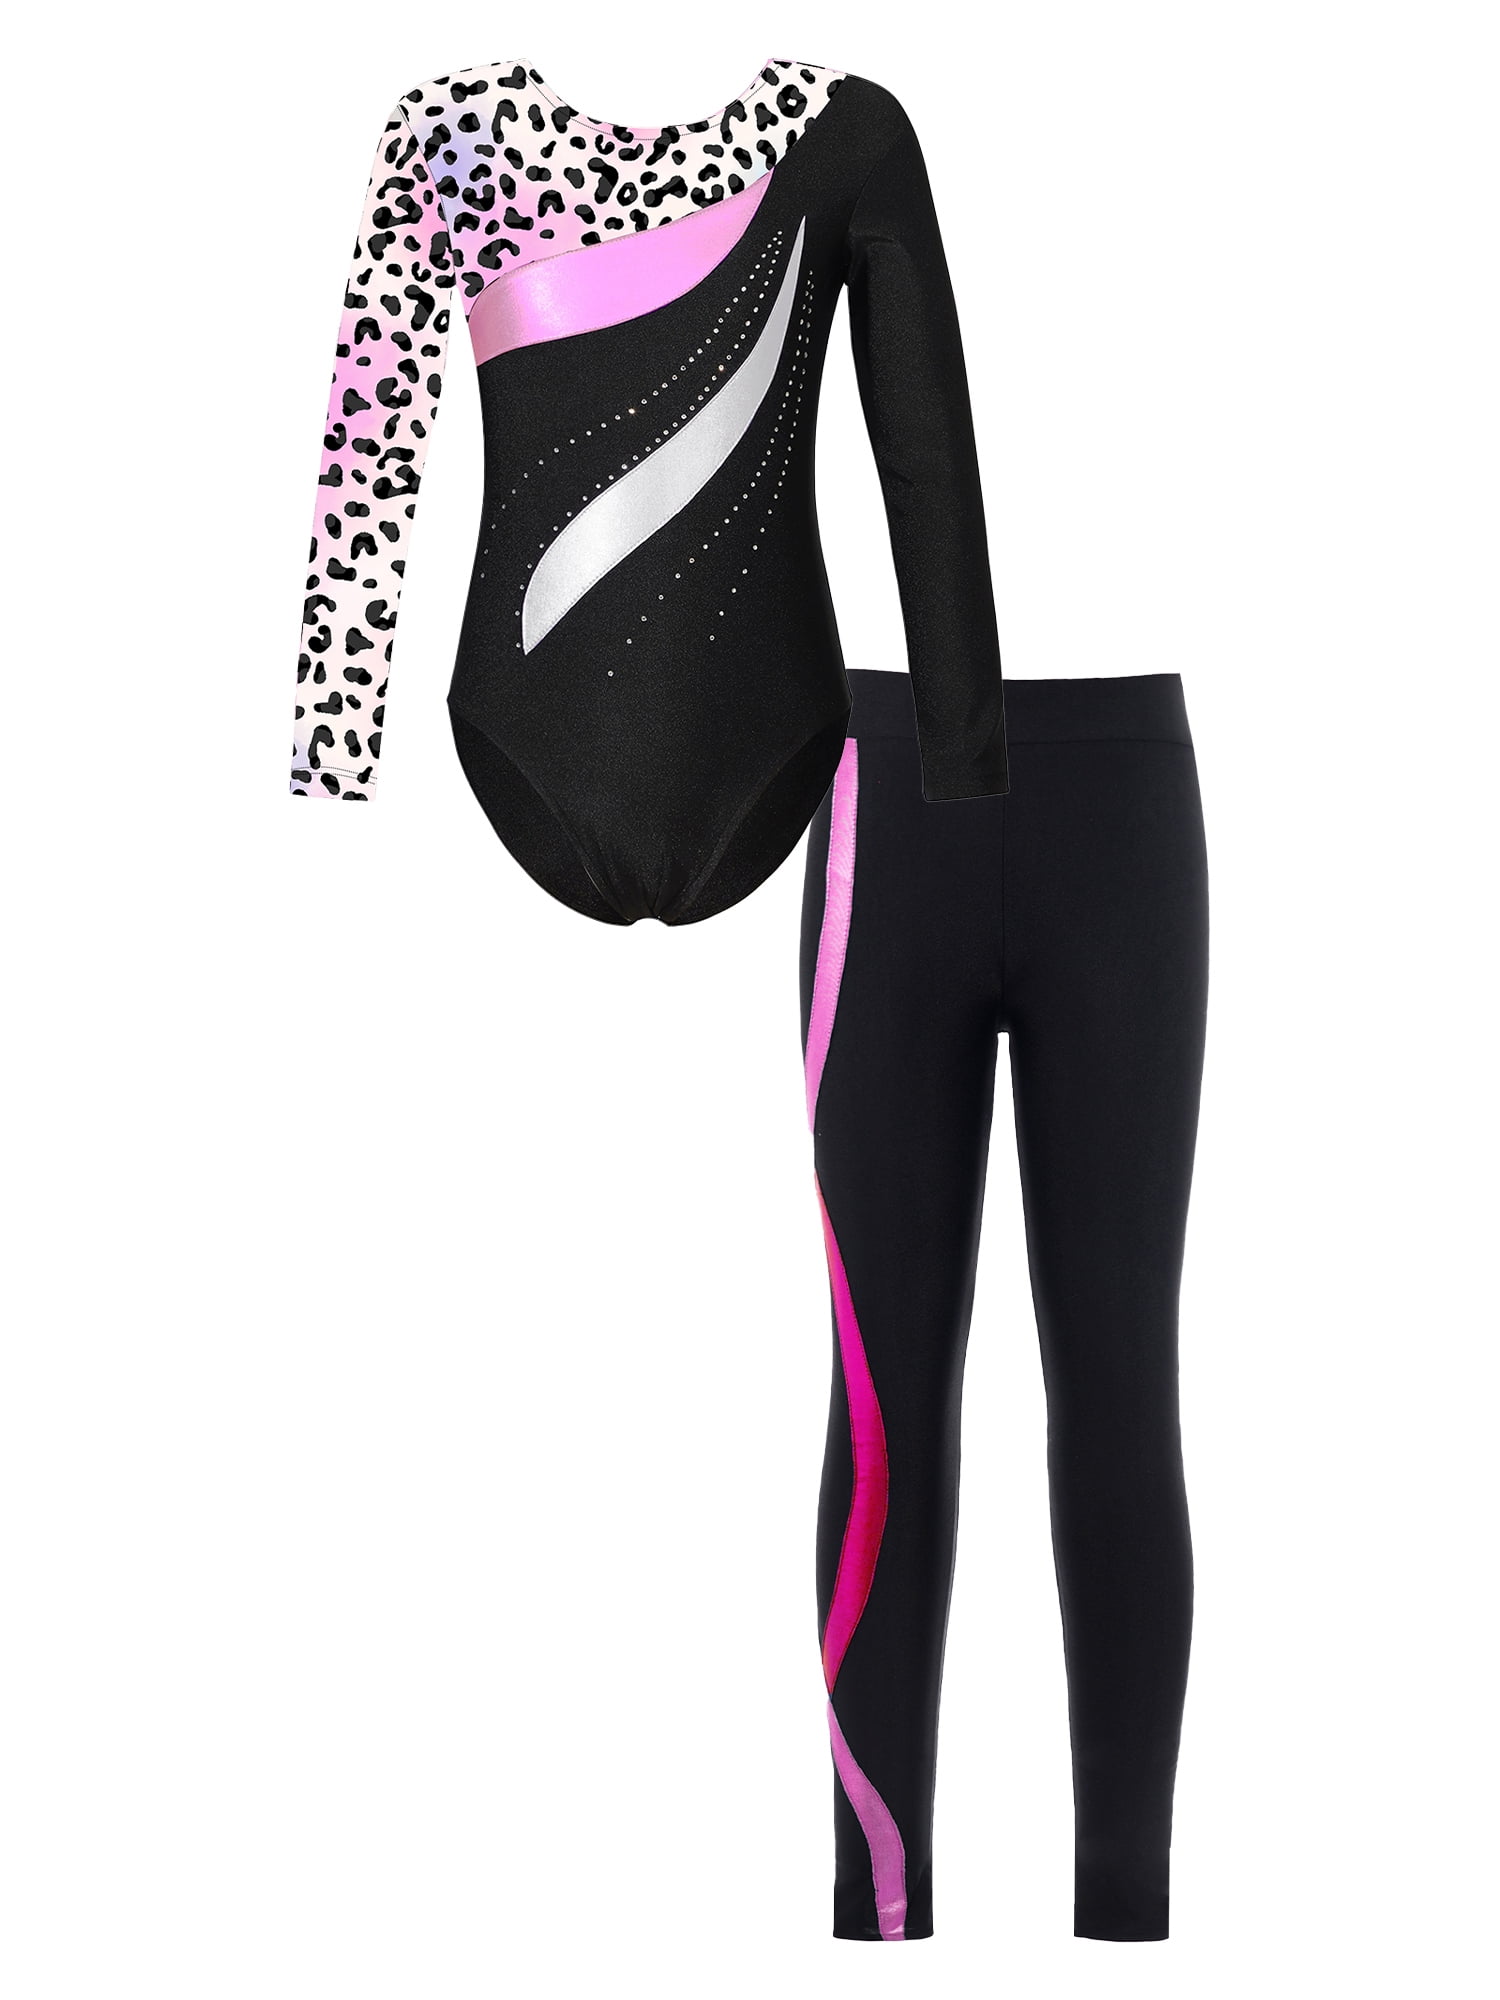 YEAHDOR Kids Girls Skating Dance Outfit Shiny Rhinestones Gym Leotard with Yoga  Pants Active Tracksuit Purple&Hot Pink 14 